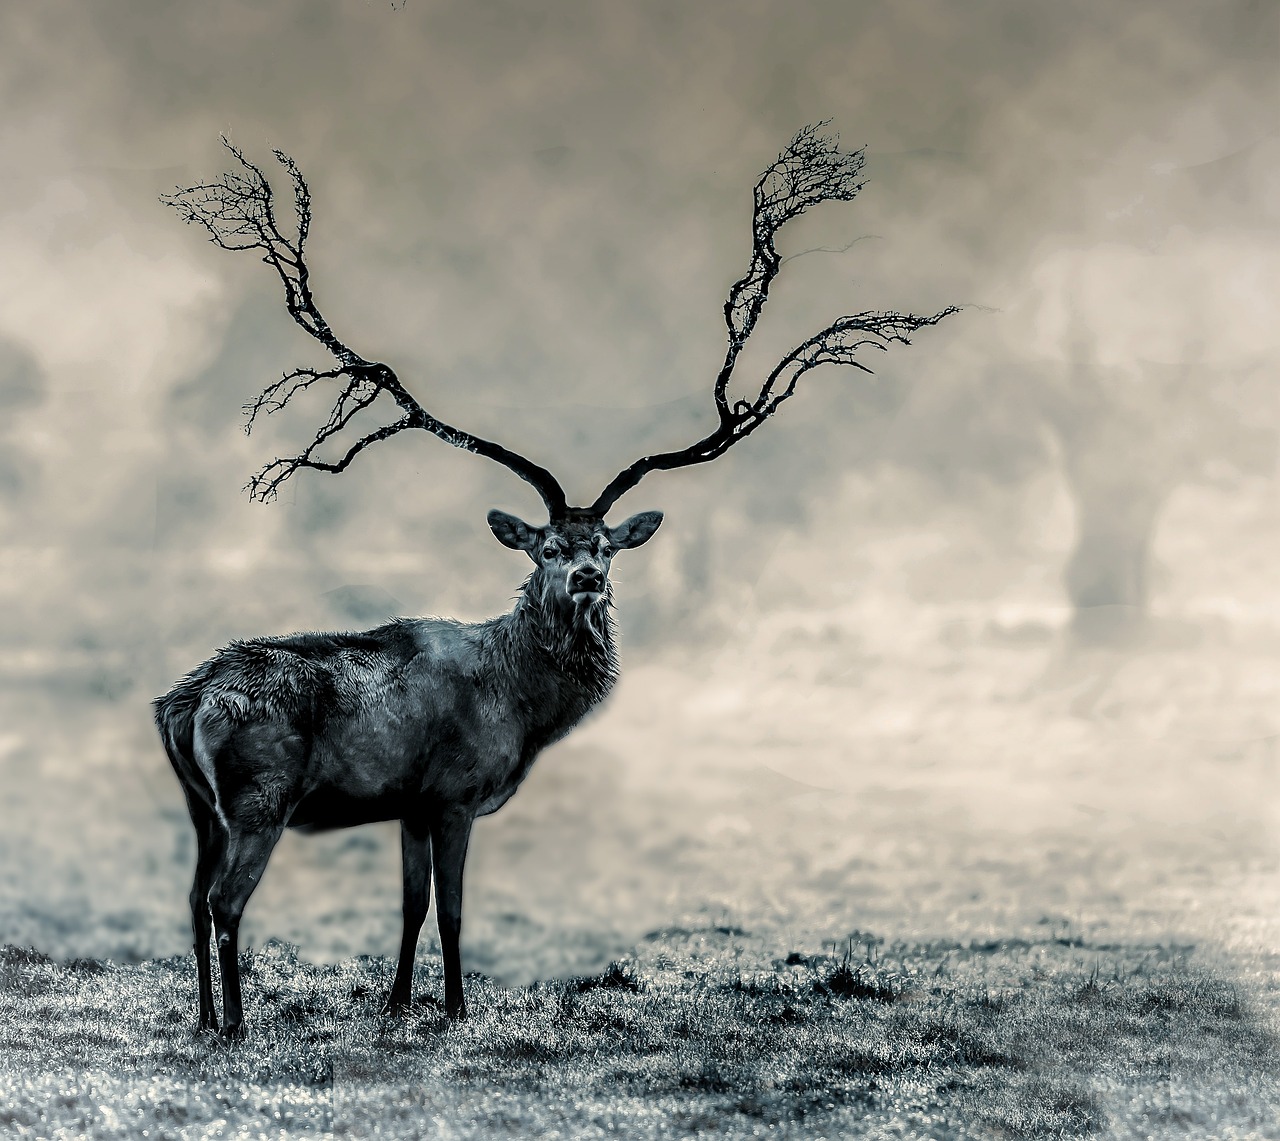 a deer that is standing in the grass, shutterstock contest winner, romanticism, sitting on a curly branch, under a gray foggy sky, symmetry!! portrait of hades, andrzej marszalek